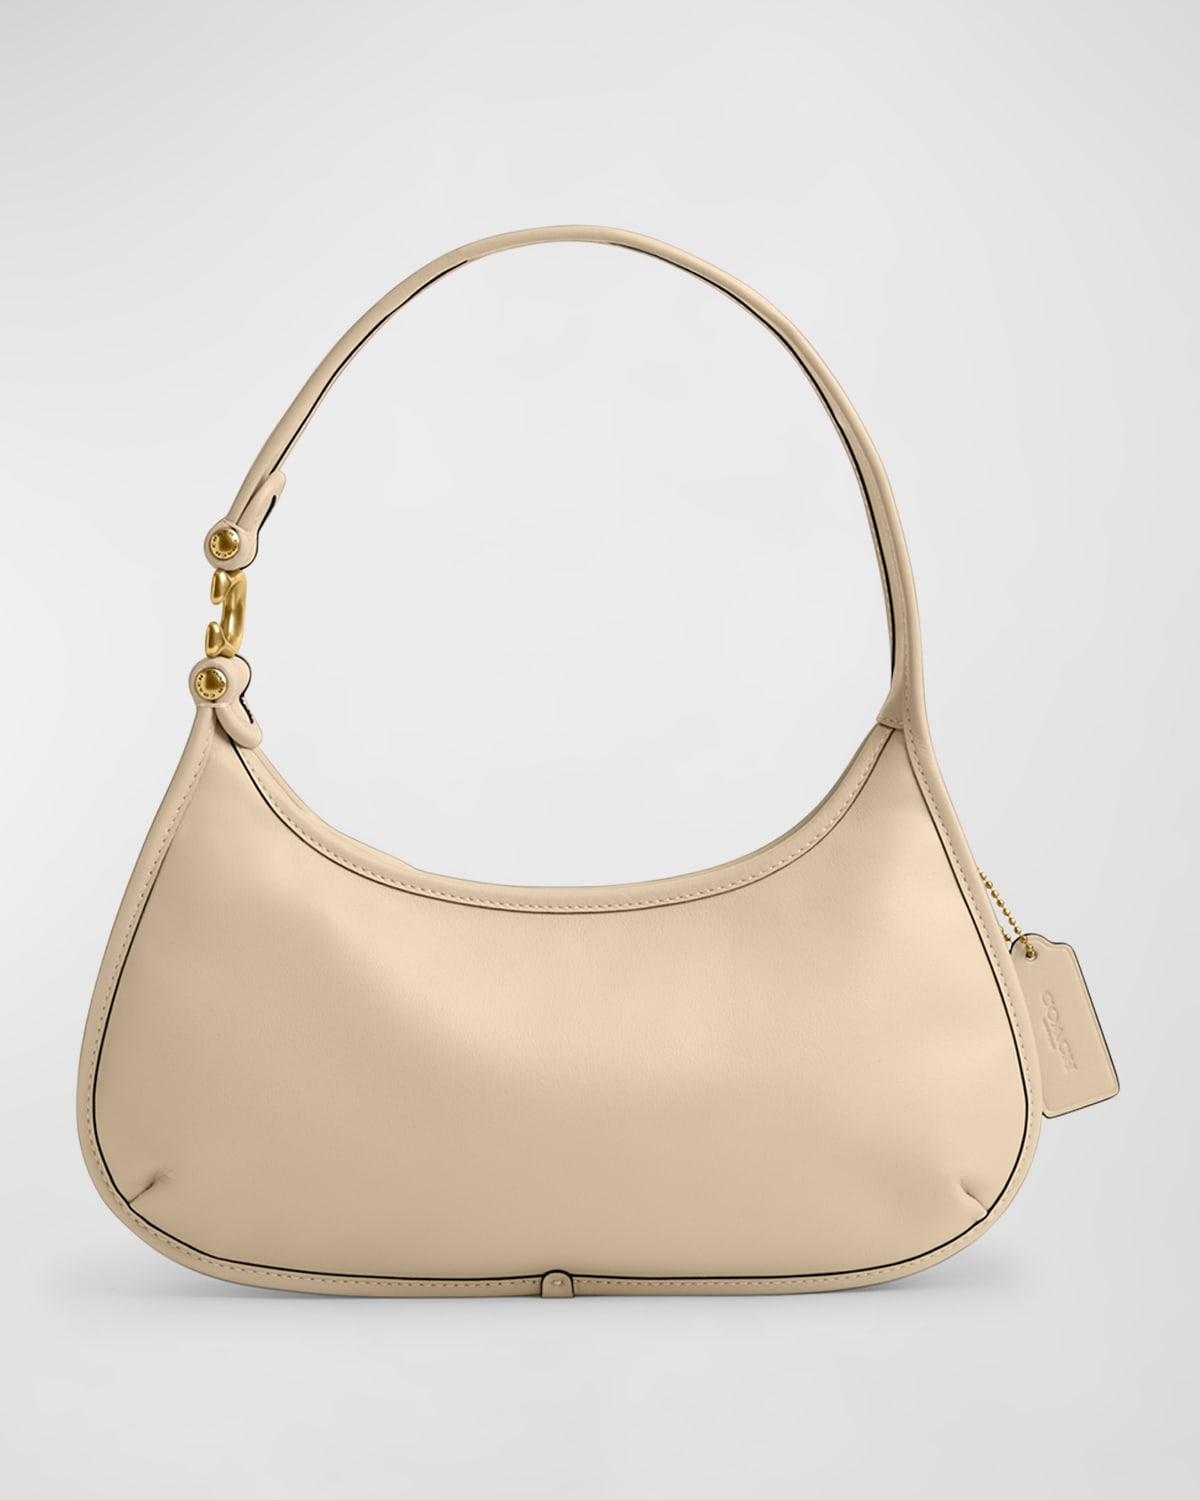 COACH Rae Colorblock Glovetanned Leather Tote